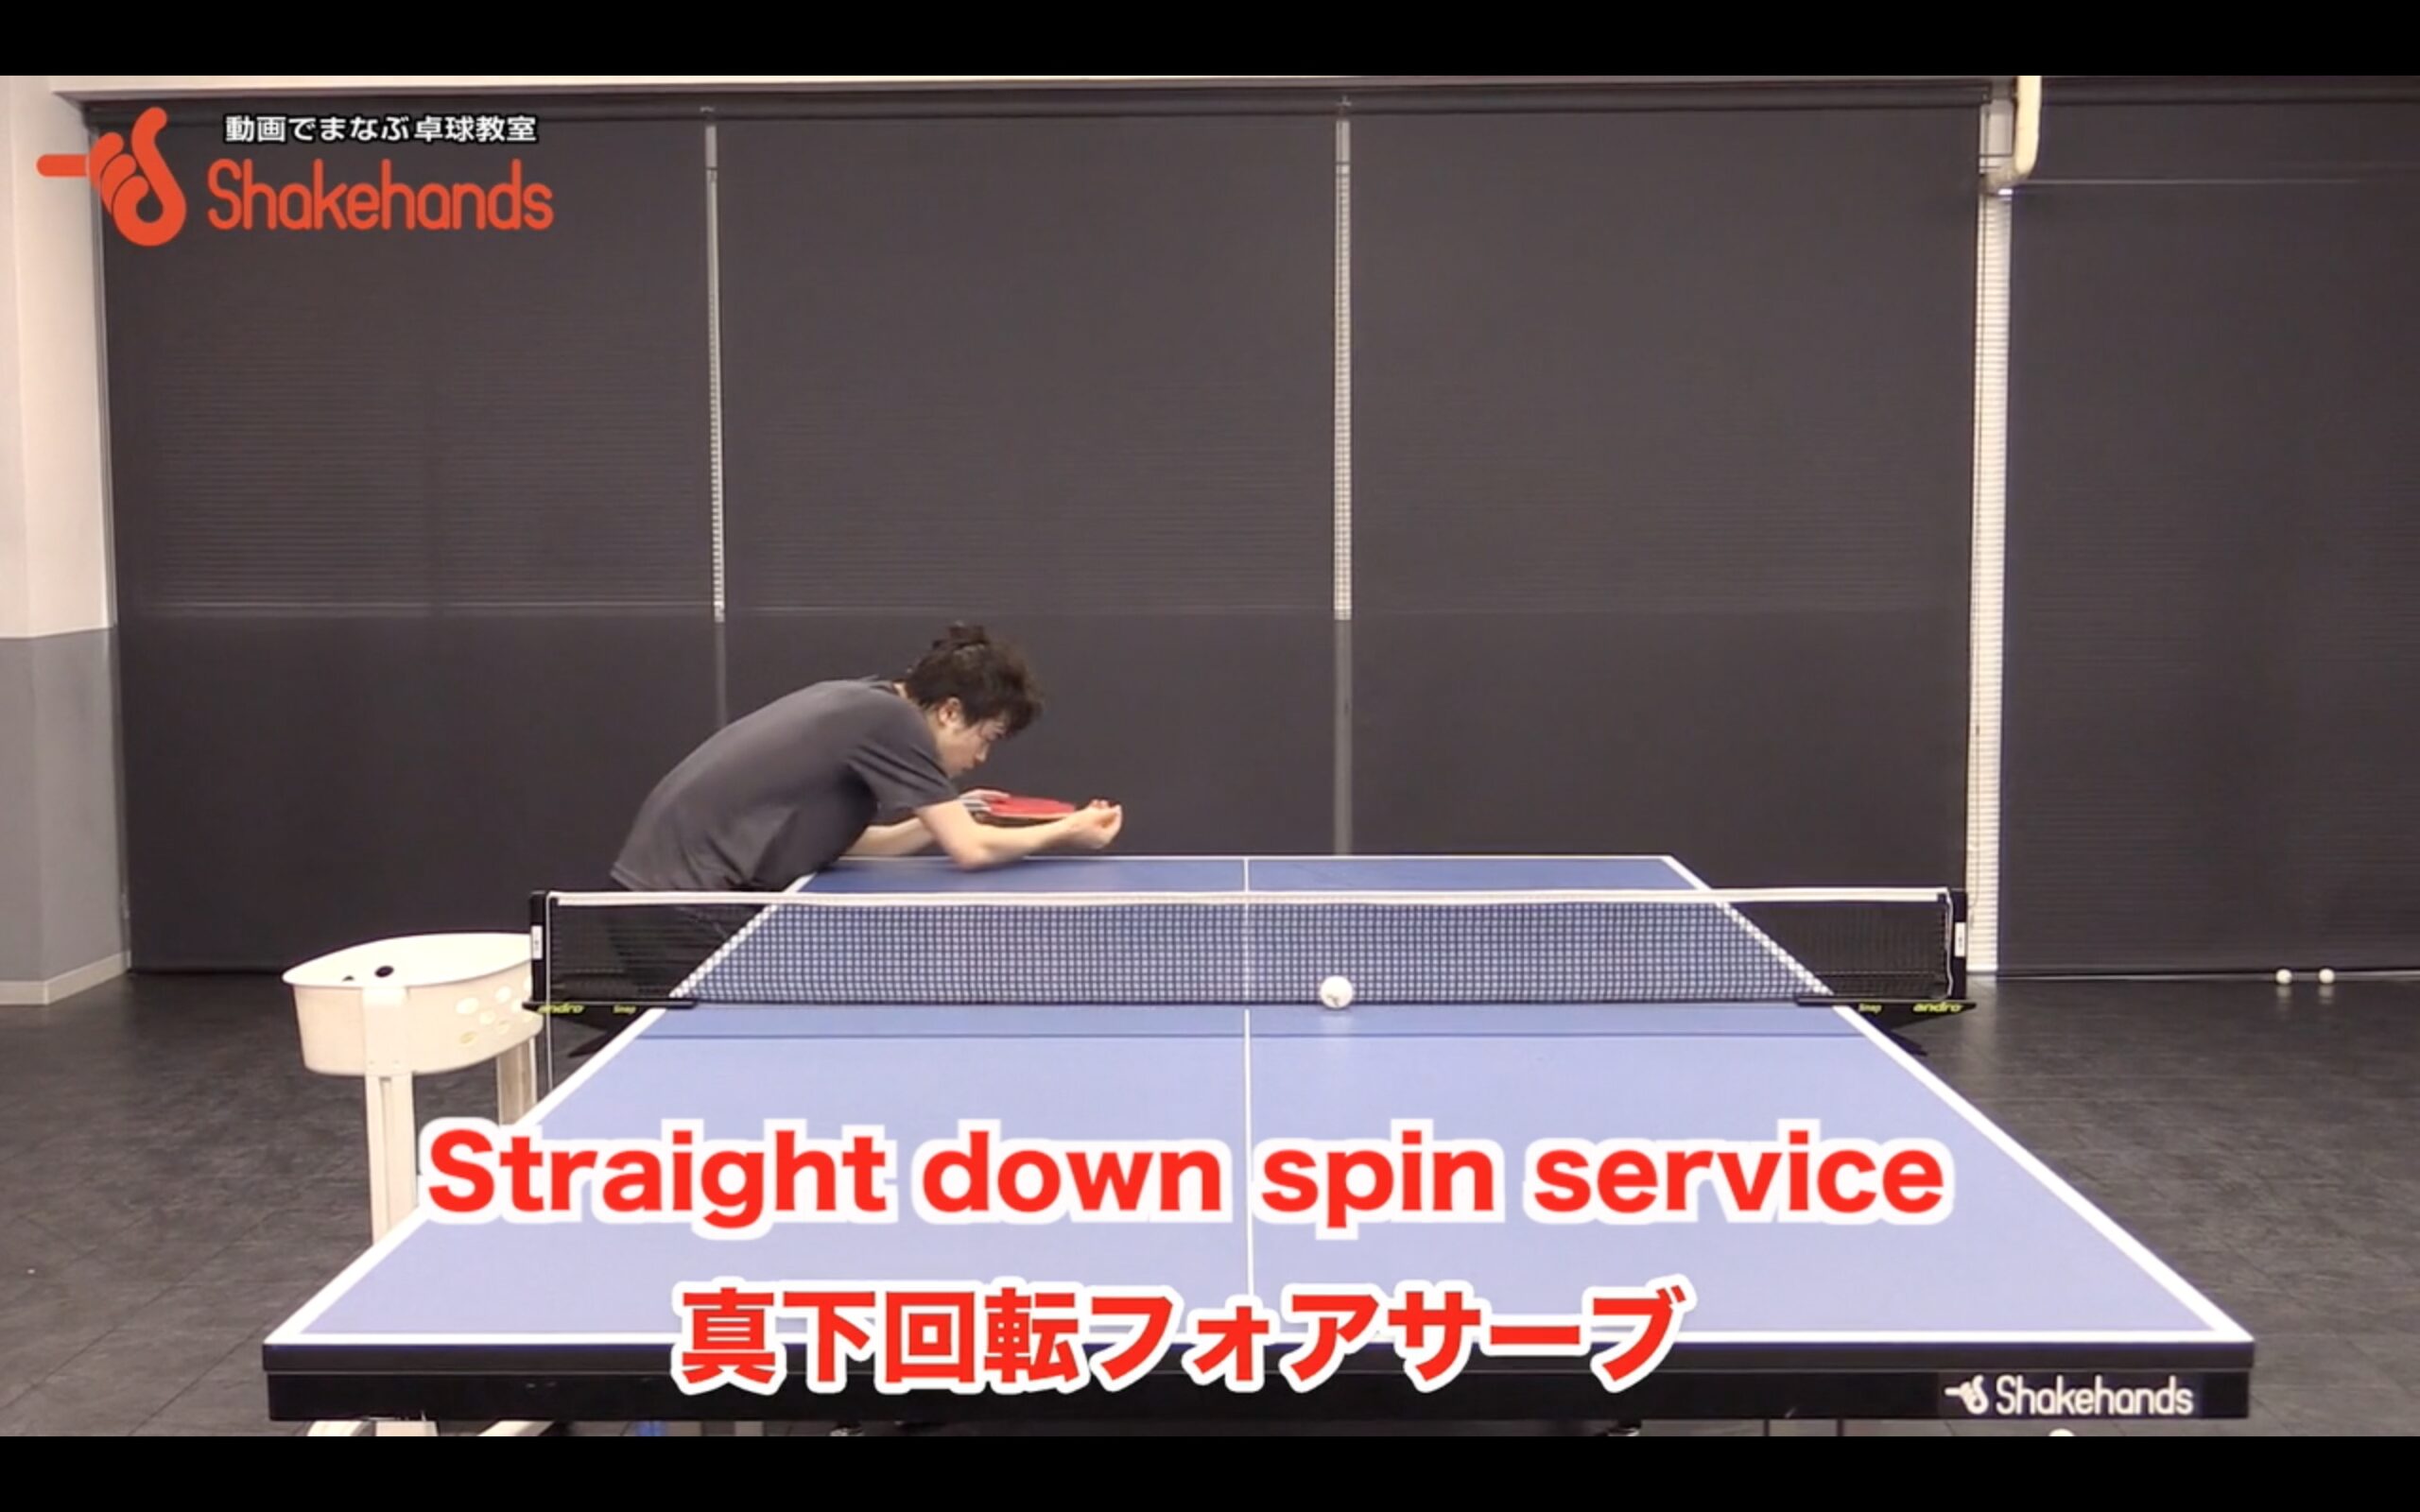 Straight down spin service